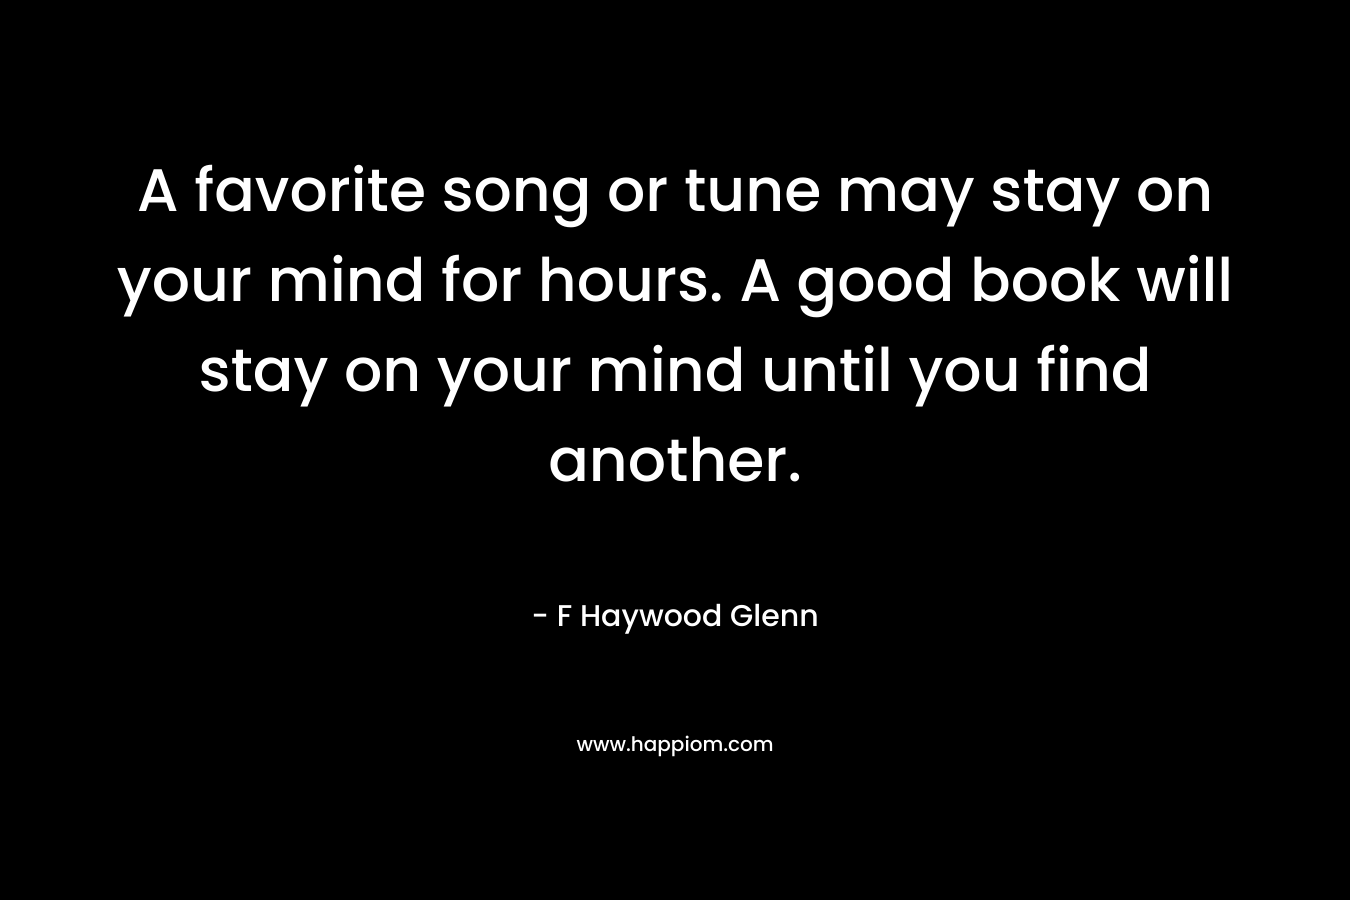 A favorite song or tune may stay on your mind for hours. A good book will stay on your mind until you find another.